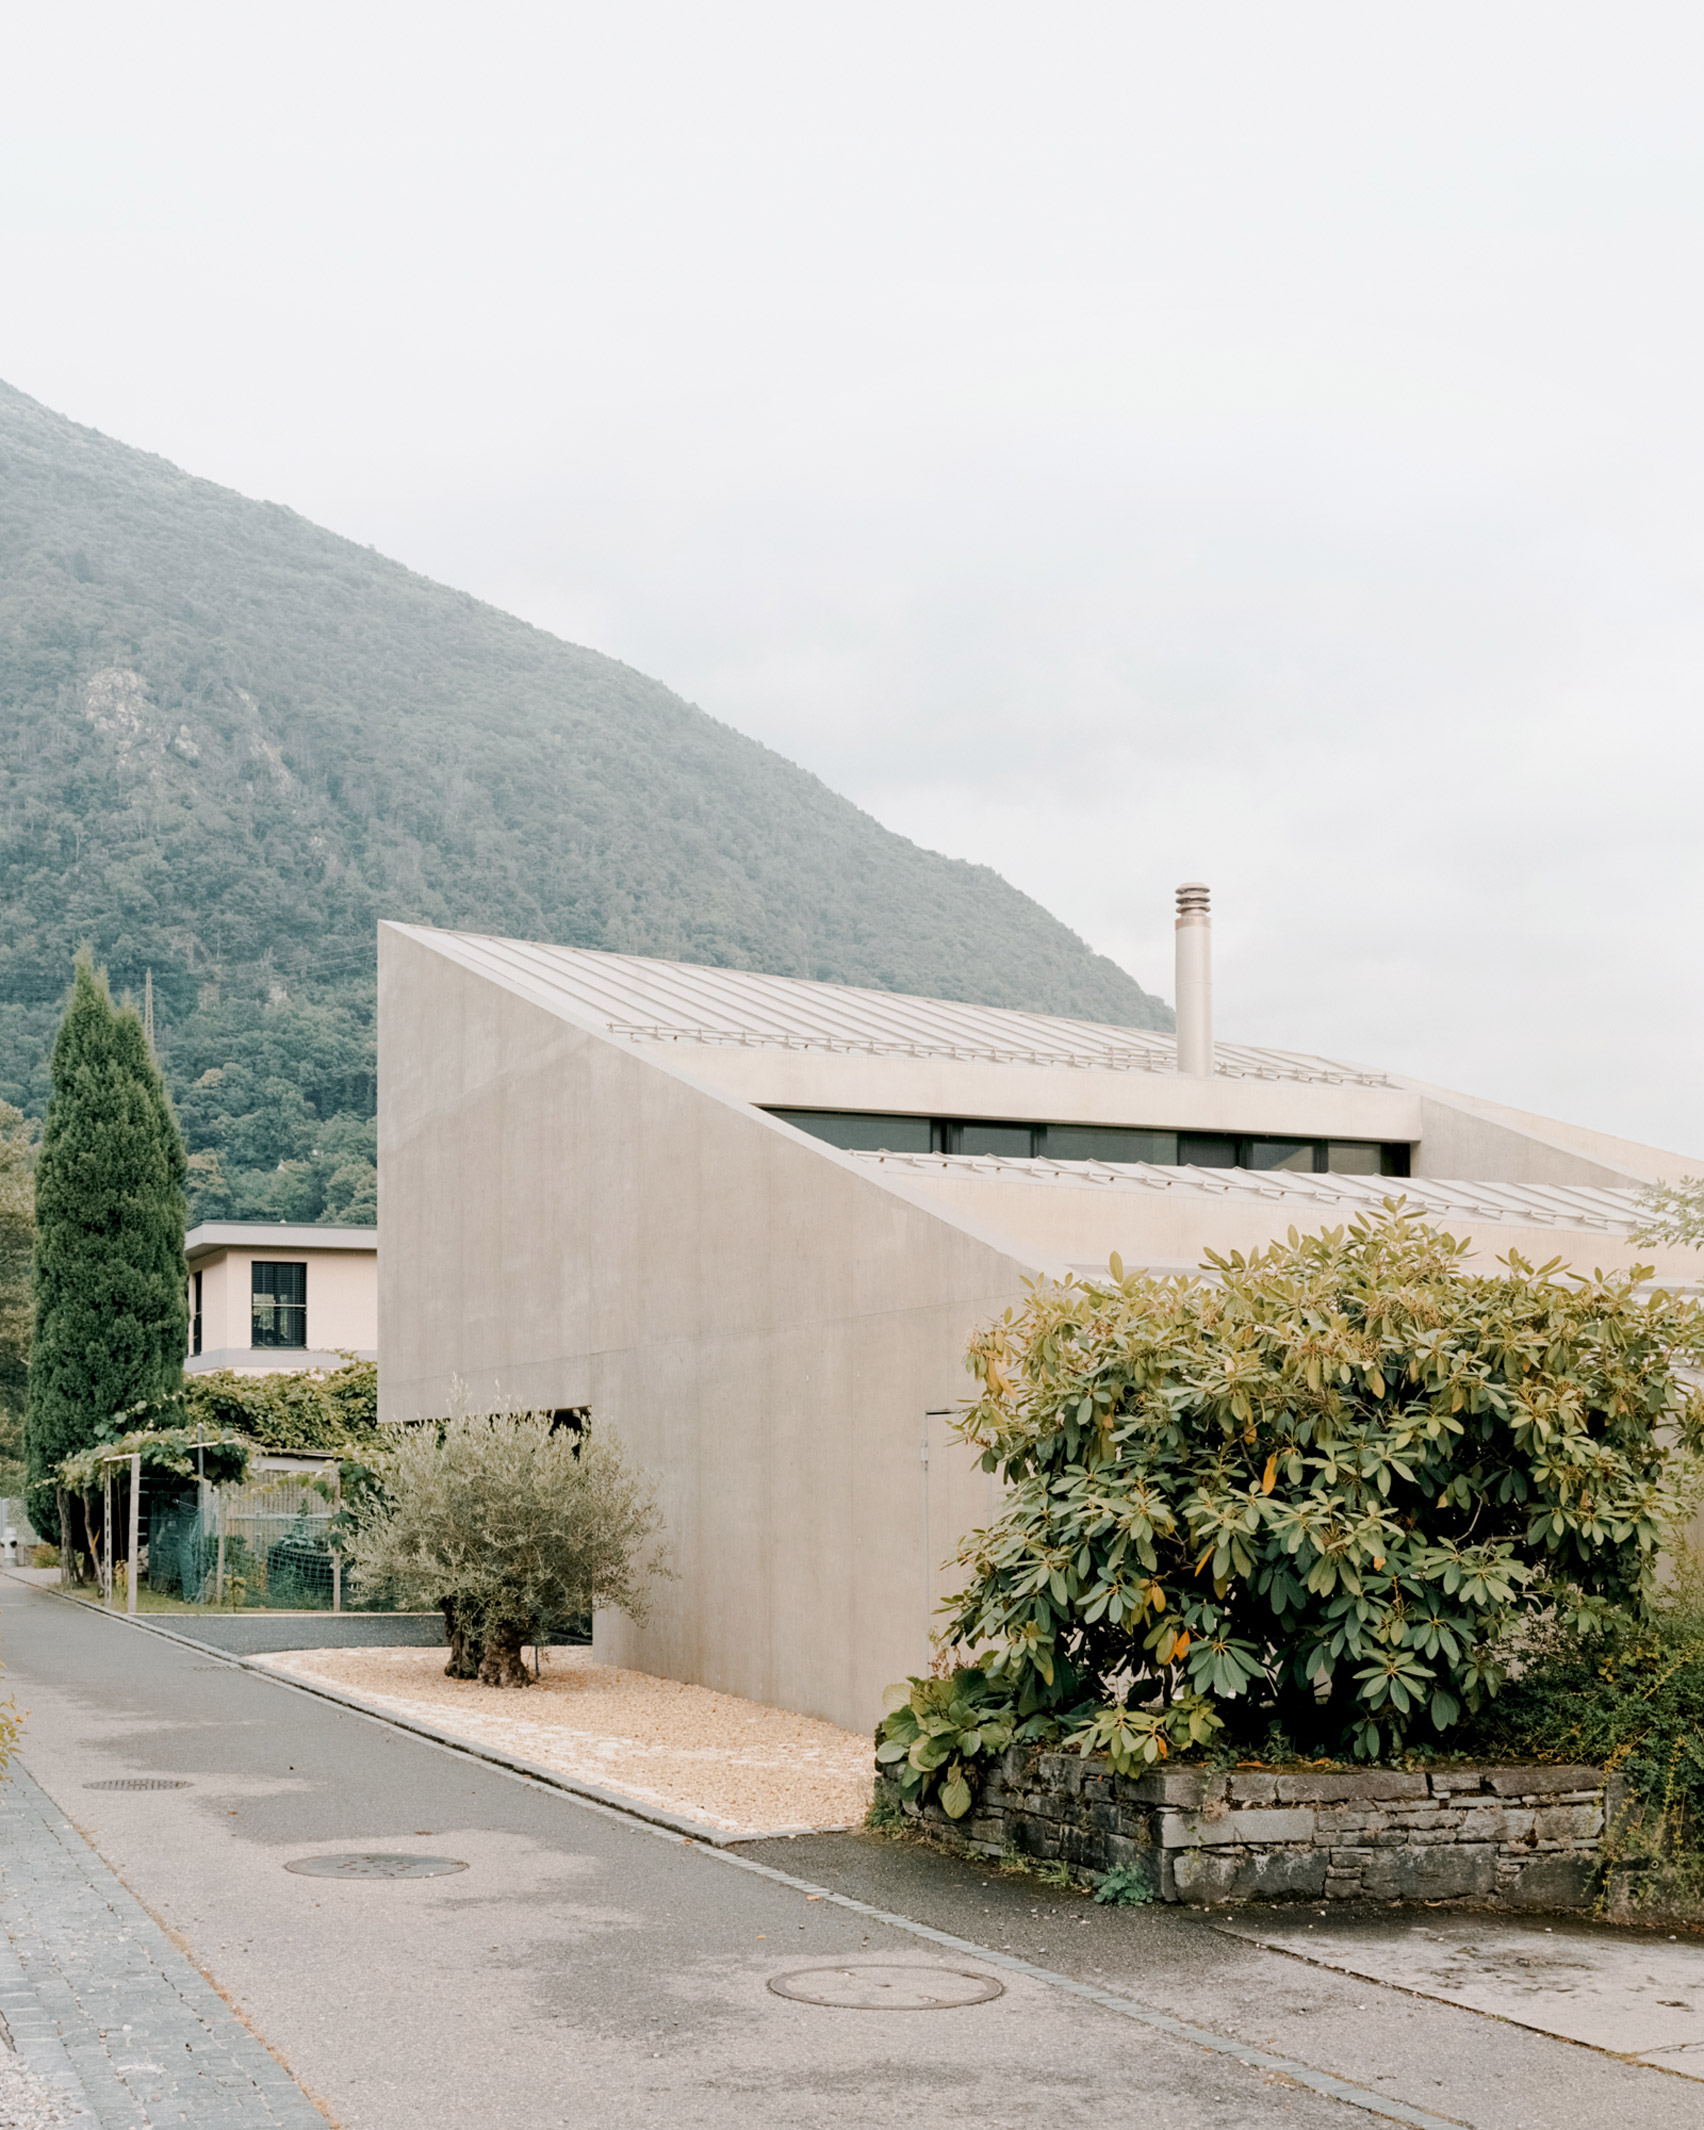 A view of Pyramid House in Switzerland by DF_DC from the street